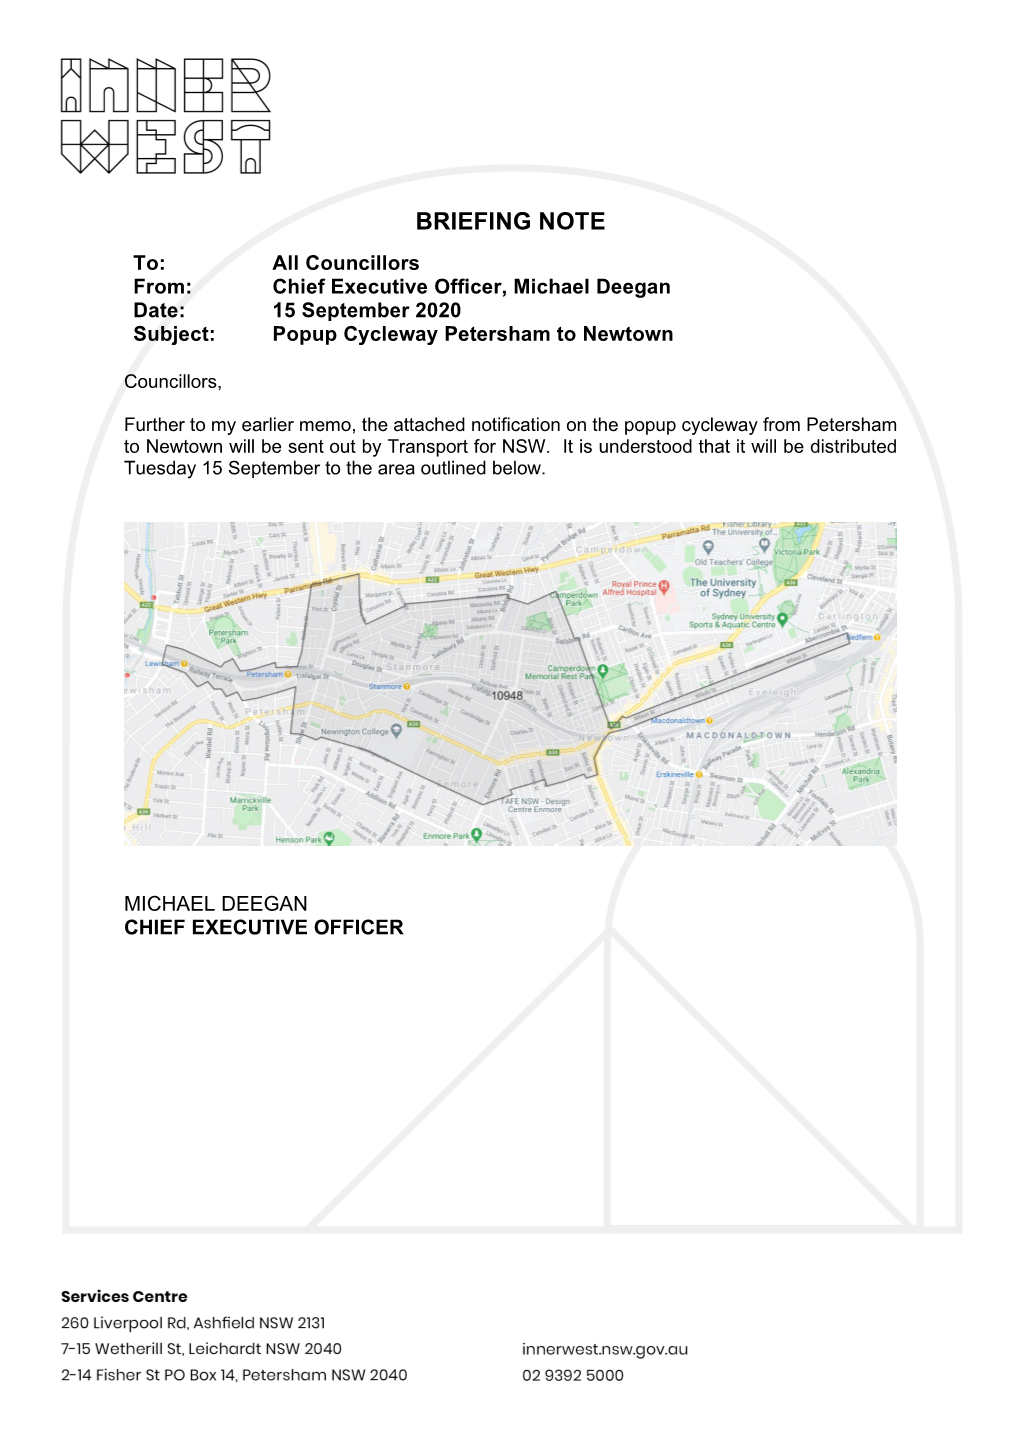 BRIEFING NOTE To: All Councillors From: Chief Executive Officer, Michael Deegan Date: 15 September 2020 Subject: Popup Cycleway Petersham to Newtown